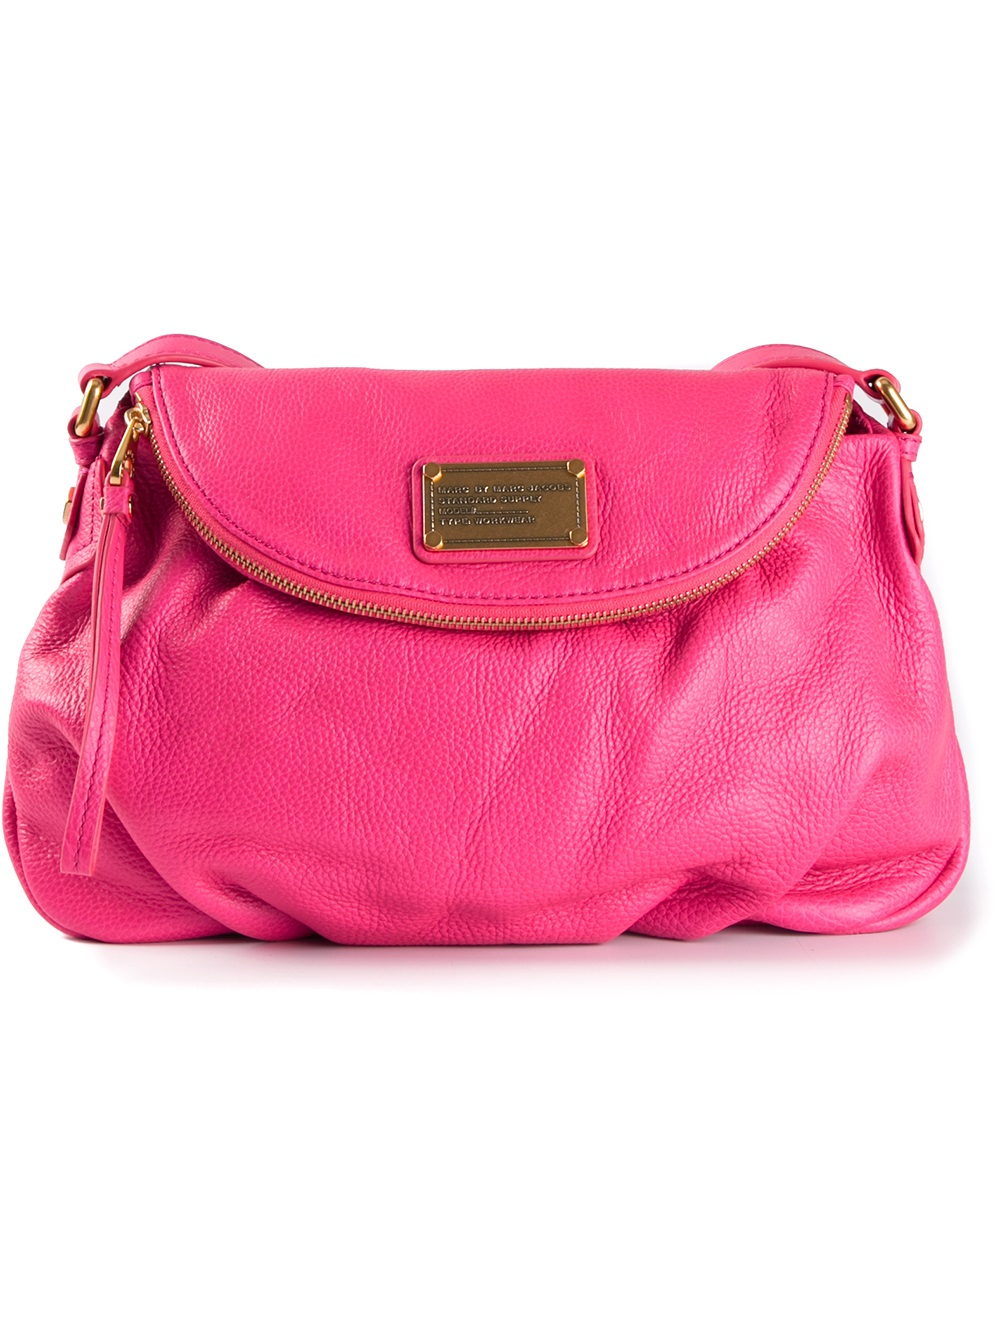 Marc By Marc Jacobs Cross Body Bag in Pink (pink & purple) | Lyst